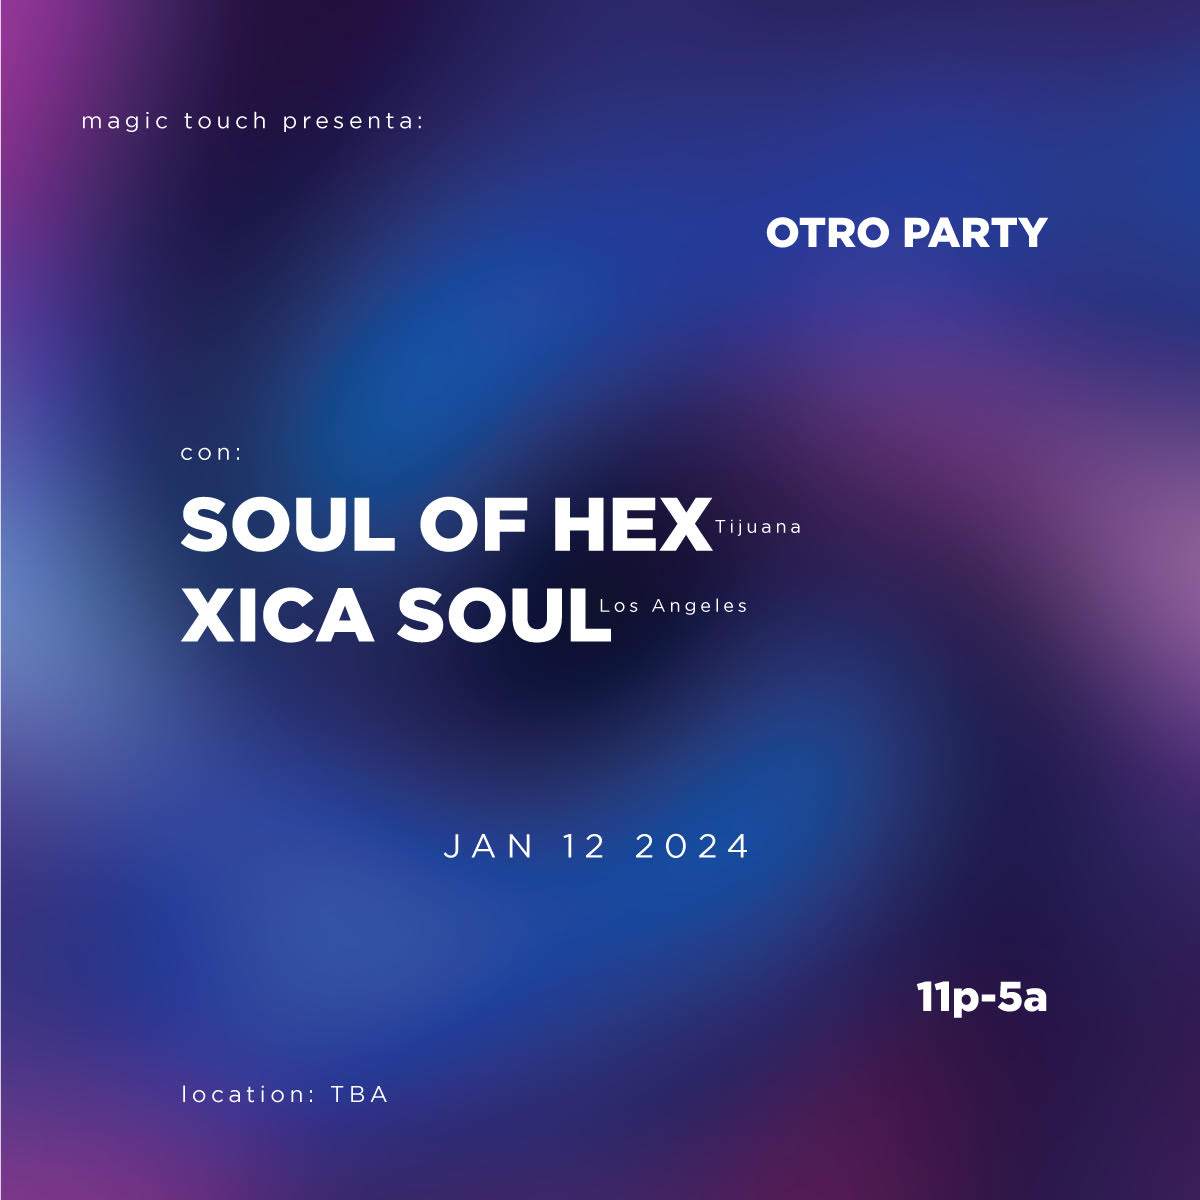 Magic Touch presents 'Otro Party' with Soul Of Hex & Xica Soul - Página frontal